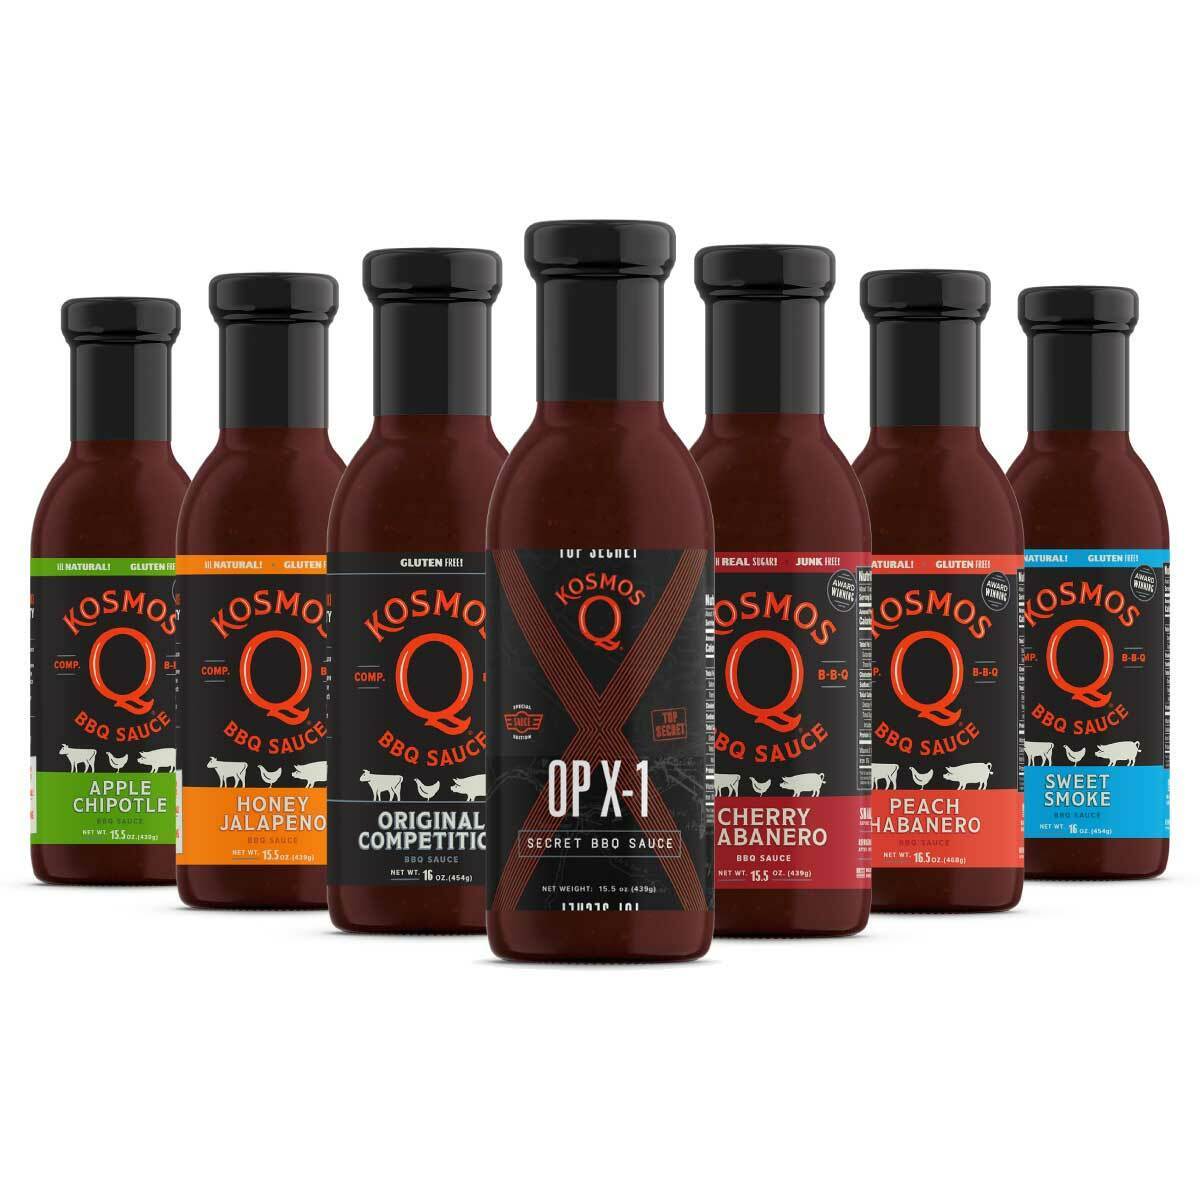 Barbecue Sauces from all over the United States to add flavor, sweetness and spice to your barbecue ribs & sandwiches